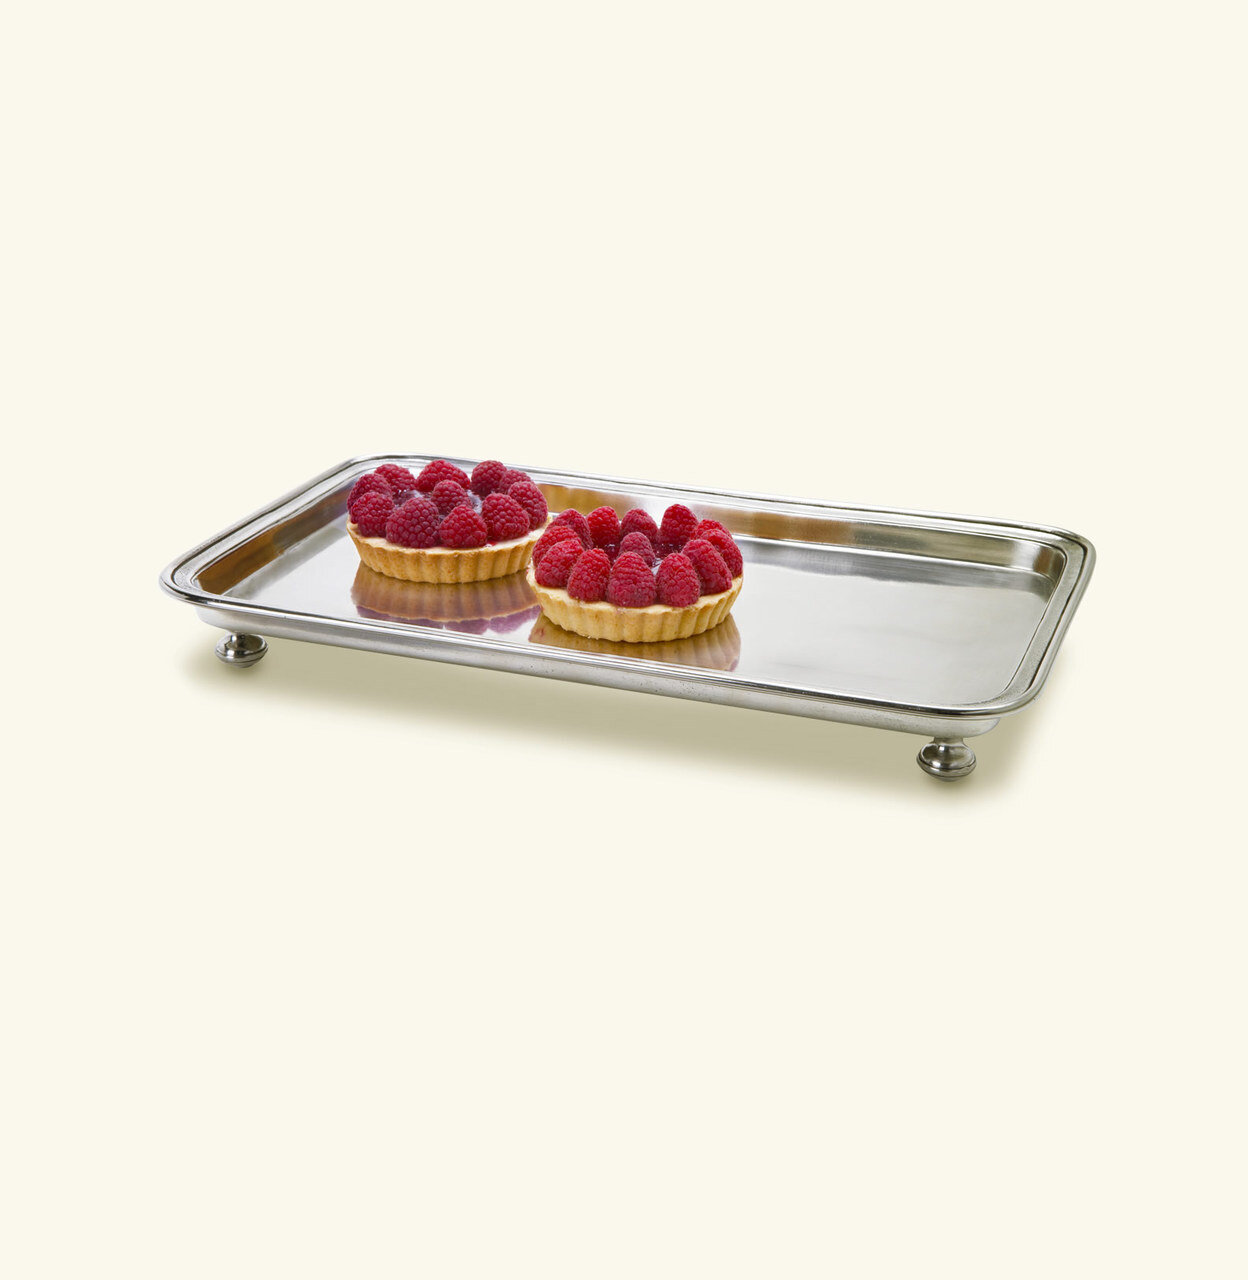 Match Pewter Footed Rectangle Service Tray 1246